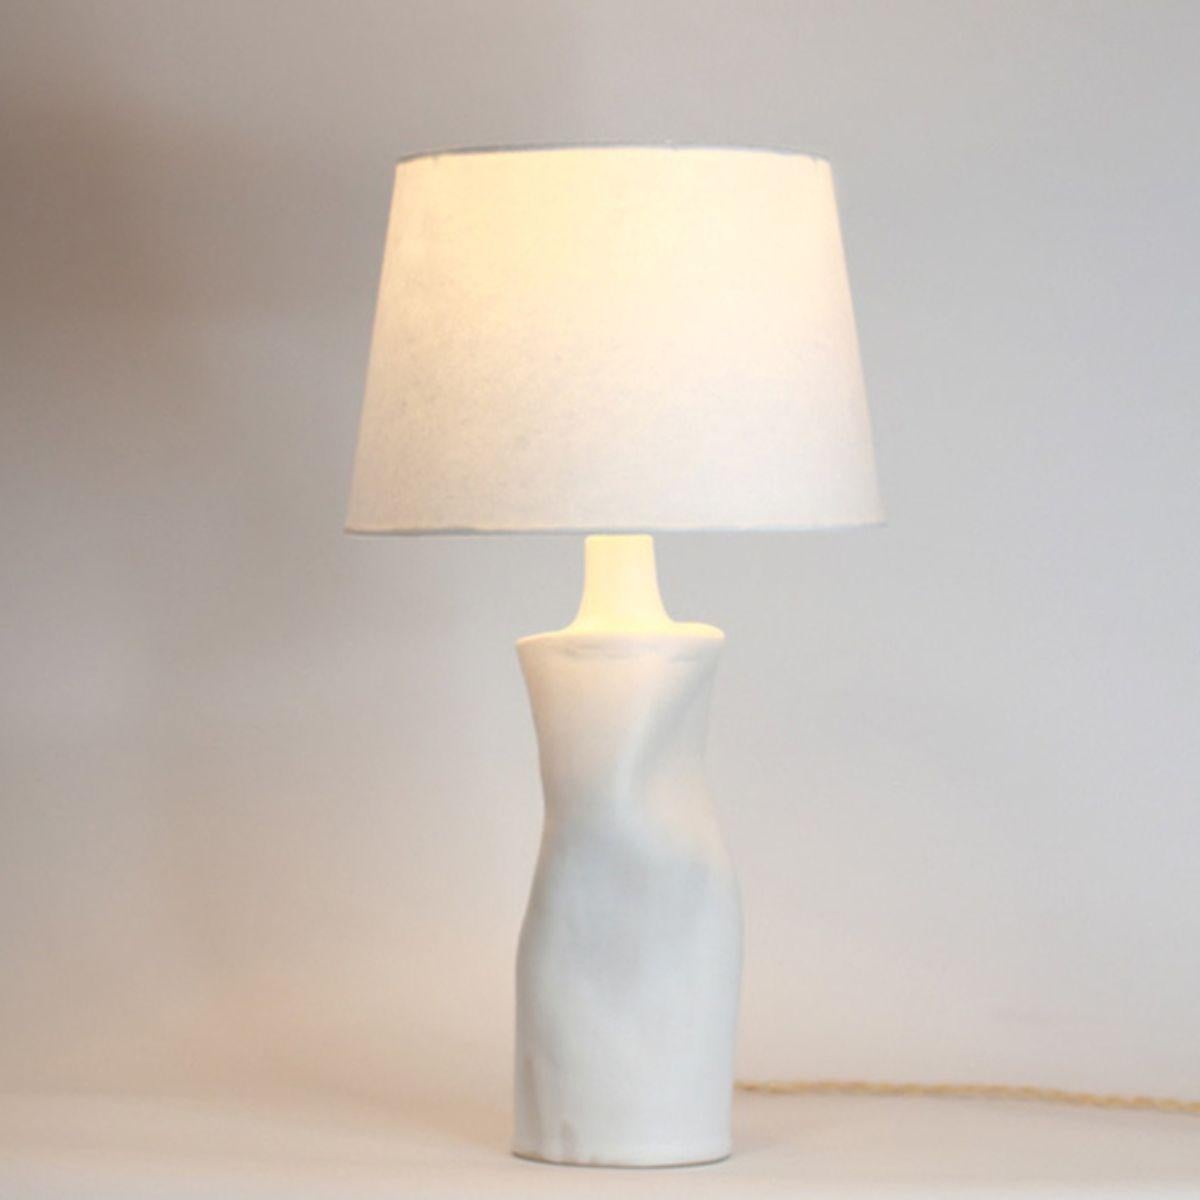 Modern 'Difforme' White Ceramic Table Lamp with Parchment Shade by Design Frères For Sale